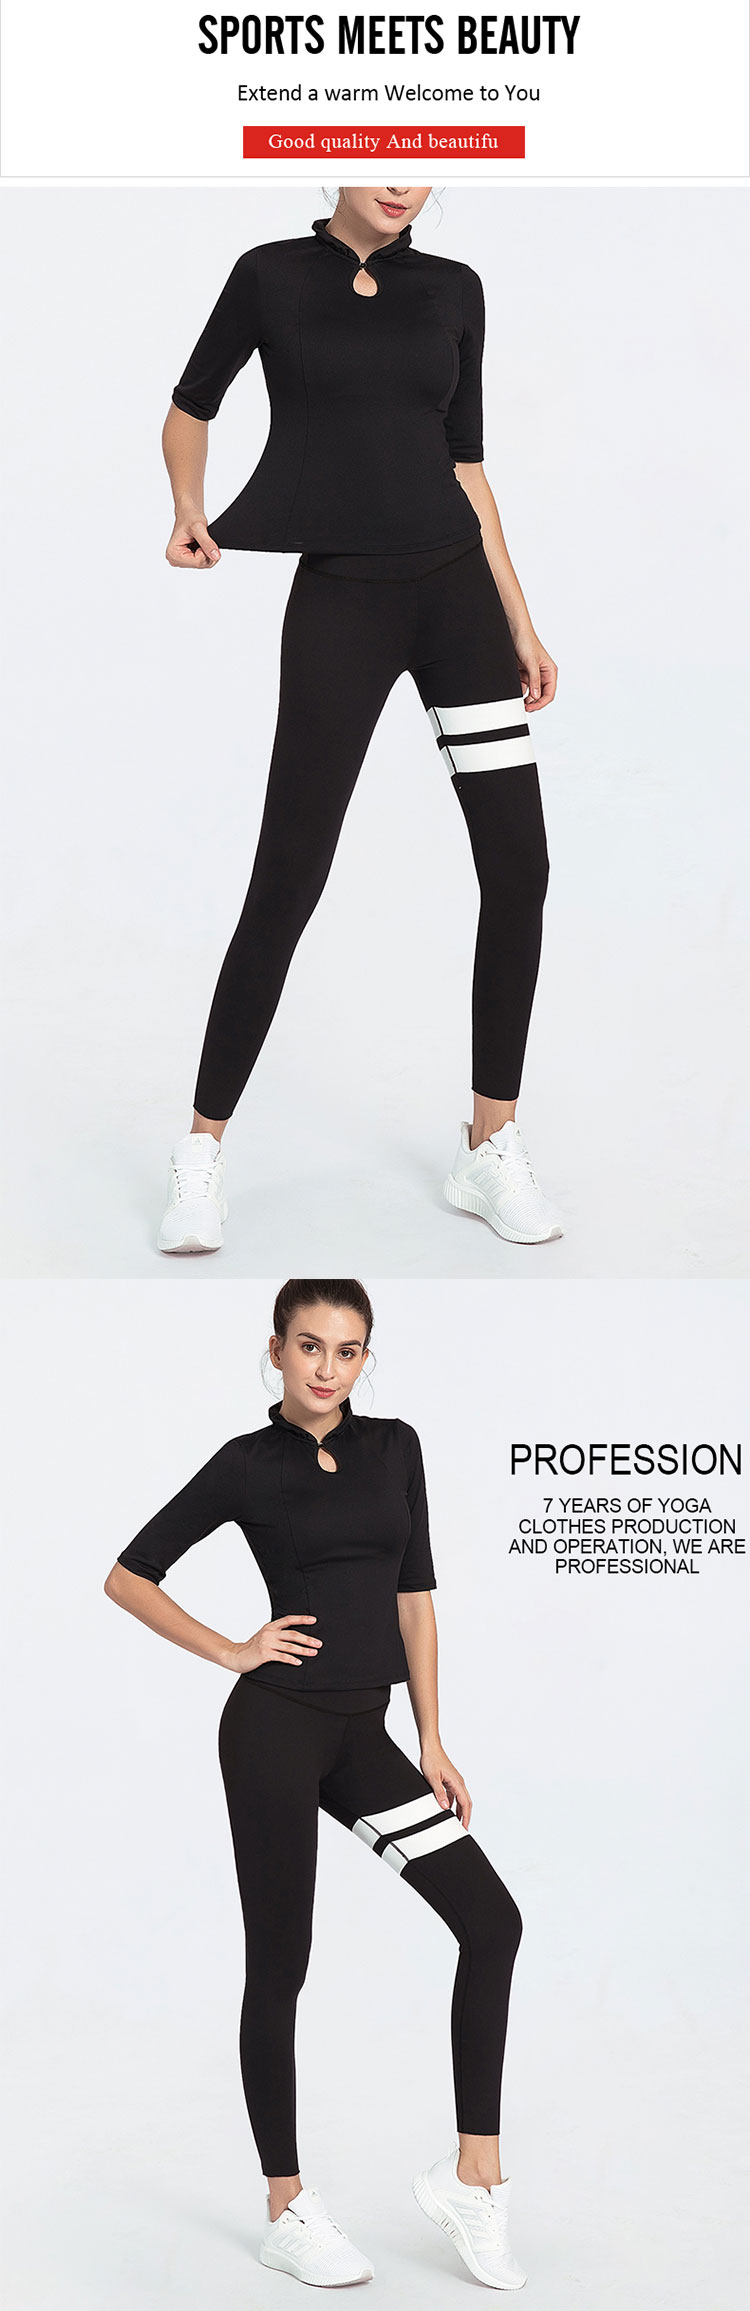 Dressy-yoga-pants-is-one-of-the-key-colors-that-promoted-by-Power-of-Hydrogen-energy